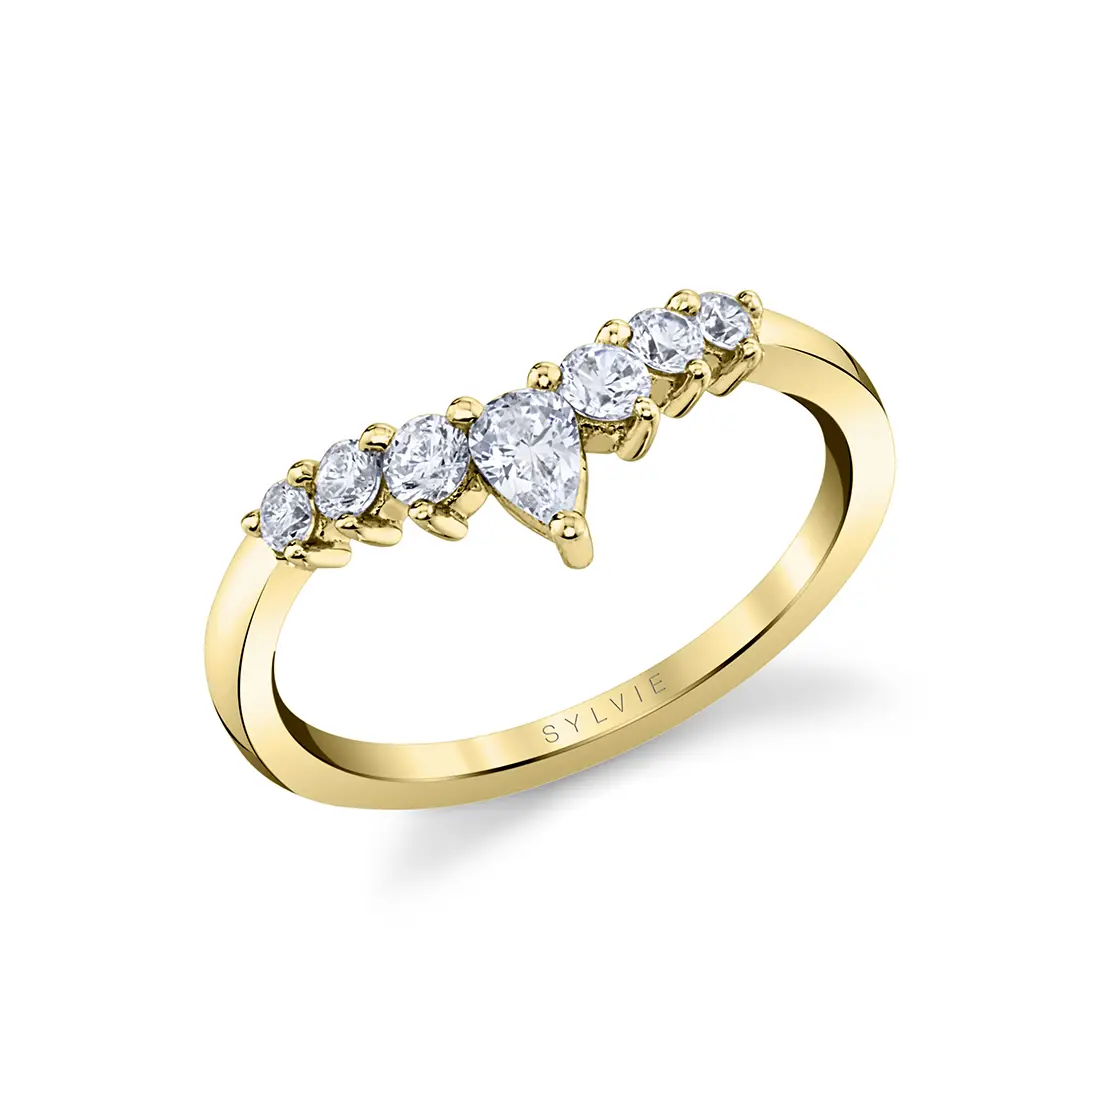 curved diamond wedding band in yellow gold